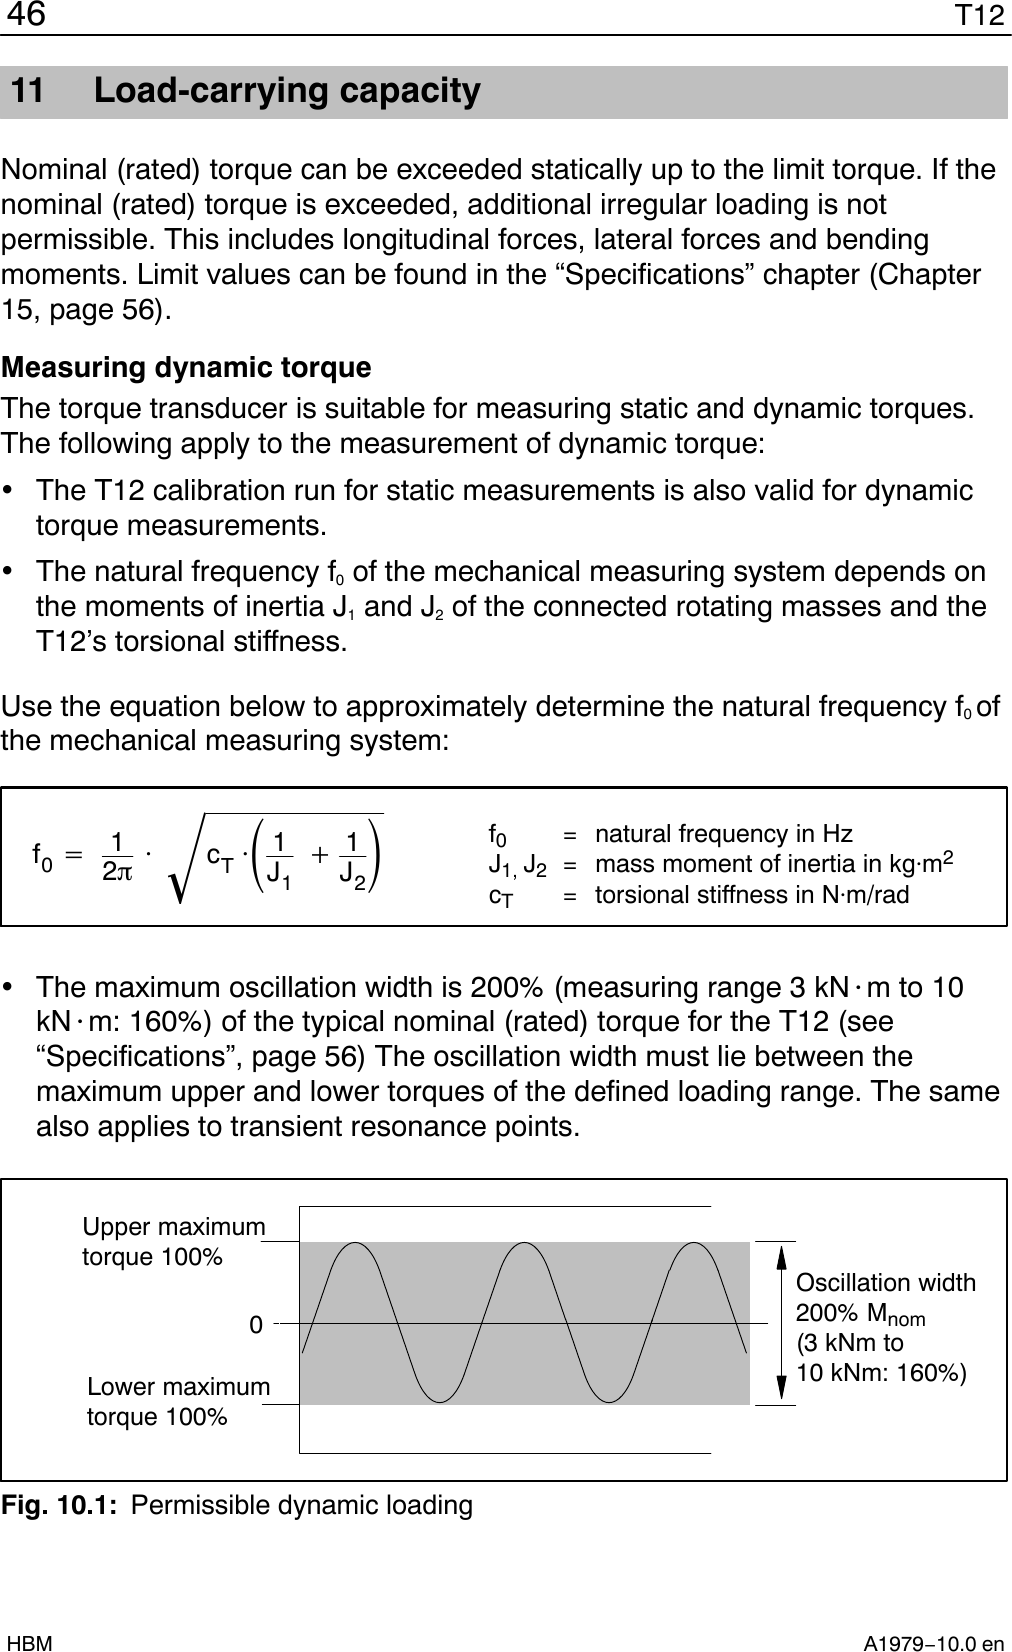 T1246A1979−10.0 enHBM11 Load-carrying capacityNominal (rated) torque can be exceeded statically up to the limit torque. If thenominal (rated) torque is exceeded, additional irregular loading is notpermissible. This includes longitudinal forces, lateral forces and bendingmoments. Limit values can be found in the “Specifications” chapter (Chapter15, page 56).Measuring dynamic torqueThe torque transducer is suitable for measuring static and dynamic torques.The following apply to the measurement of dynamic torque:The T12 calibration run for static measurements is also valid for dynamictorque measurements.The natural frequency f0 of the mechanical measuring system depends onthe moments of inertia J1 and J2 of the connected rotating masses and theT12’s torsional stiffness.Use the equation below to approximately determine the natural frequency f0 ofthe mechanical measuring system:f0+12p·cT·ǒ1J1)1J2ǓǸf0=  natural frequency in HzJ1, J2= mass moment of inertia in kgm2cT= torsional stiffness in Nm/radThe maximum oscillation width is 200% (measuring range 3 kN@m to 10kN@m: 160%) of the typical nominal (rated) torque for the T12 (see“Specifications”, page 56) The oscillation width must lie between themaximum upper and lower torques of the defined loading range. The samealso applies to transient resonance points.0Upper maximumtorque 100%Lower maximumtorque 100%Oscillation width200% Mnom(3 kNm to 10 kNm: 160%)Fig. 10.1: Permissible dynamic loading